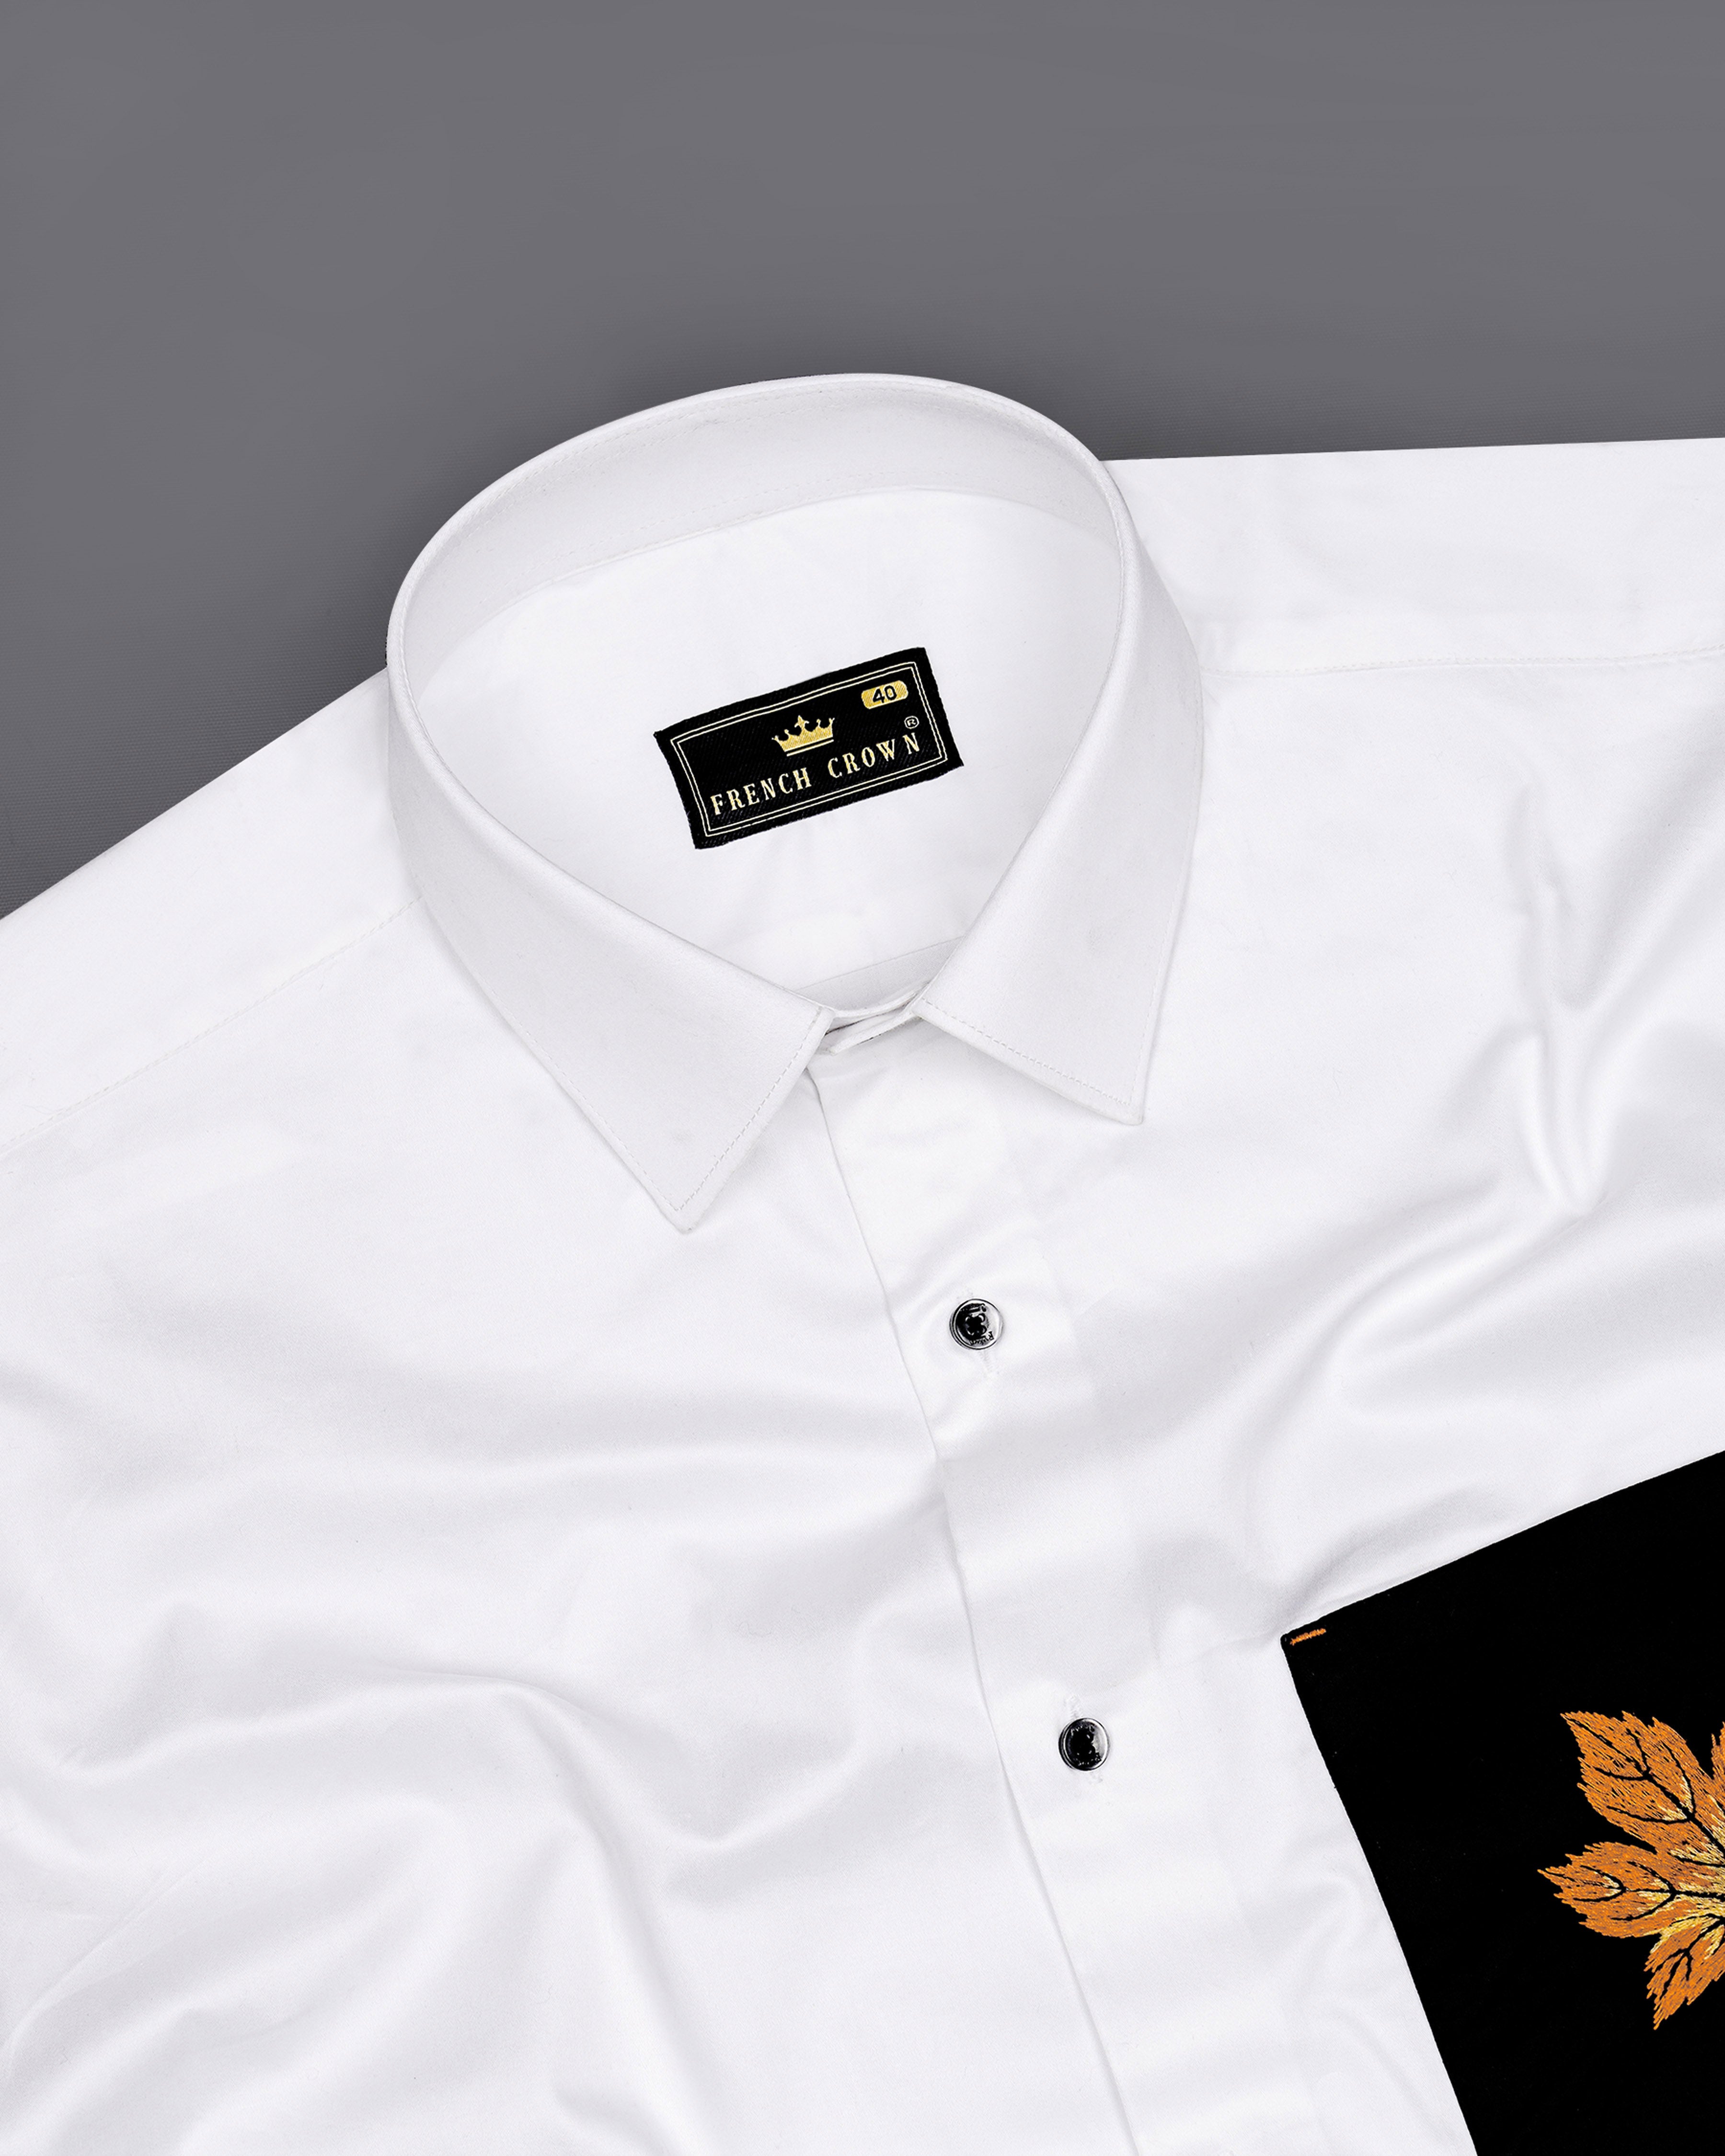 Bright White with Black Pocket and Leaves Embroidered Super Soft Premium Cotton Shirt 1062-BLK-P494-38, 1062-BLK-P494-H-38, 1062-BLK-P494-39, 1062-BLK-P494-H-39, 1062-BLK-P494-40, 1062-BLK-P494-H-40, 1062-BLK-P494-42, 1062-BLK-P494-H-42, 1062-BLK-P494-44, 1062-BLK-P494-H-44, 1062-BLK-P494-46, 1062-BLK-P494-H-46, 1062-BLK-P494-48, 1062-BLK-P494-H-48, 1062-BLK-P494-50, 1062-BLK-P494-H-50, 1062-BLK-P494-52, 1062-BLK-P494-H-52